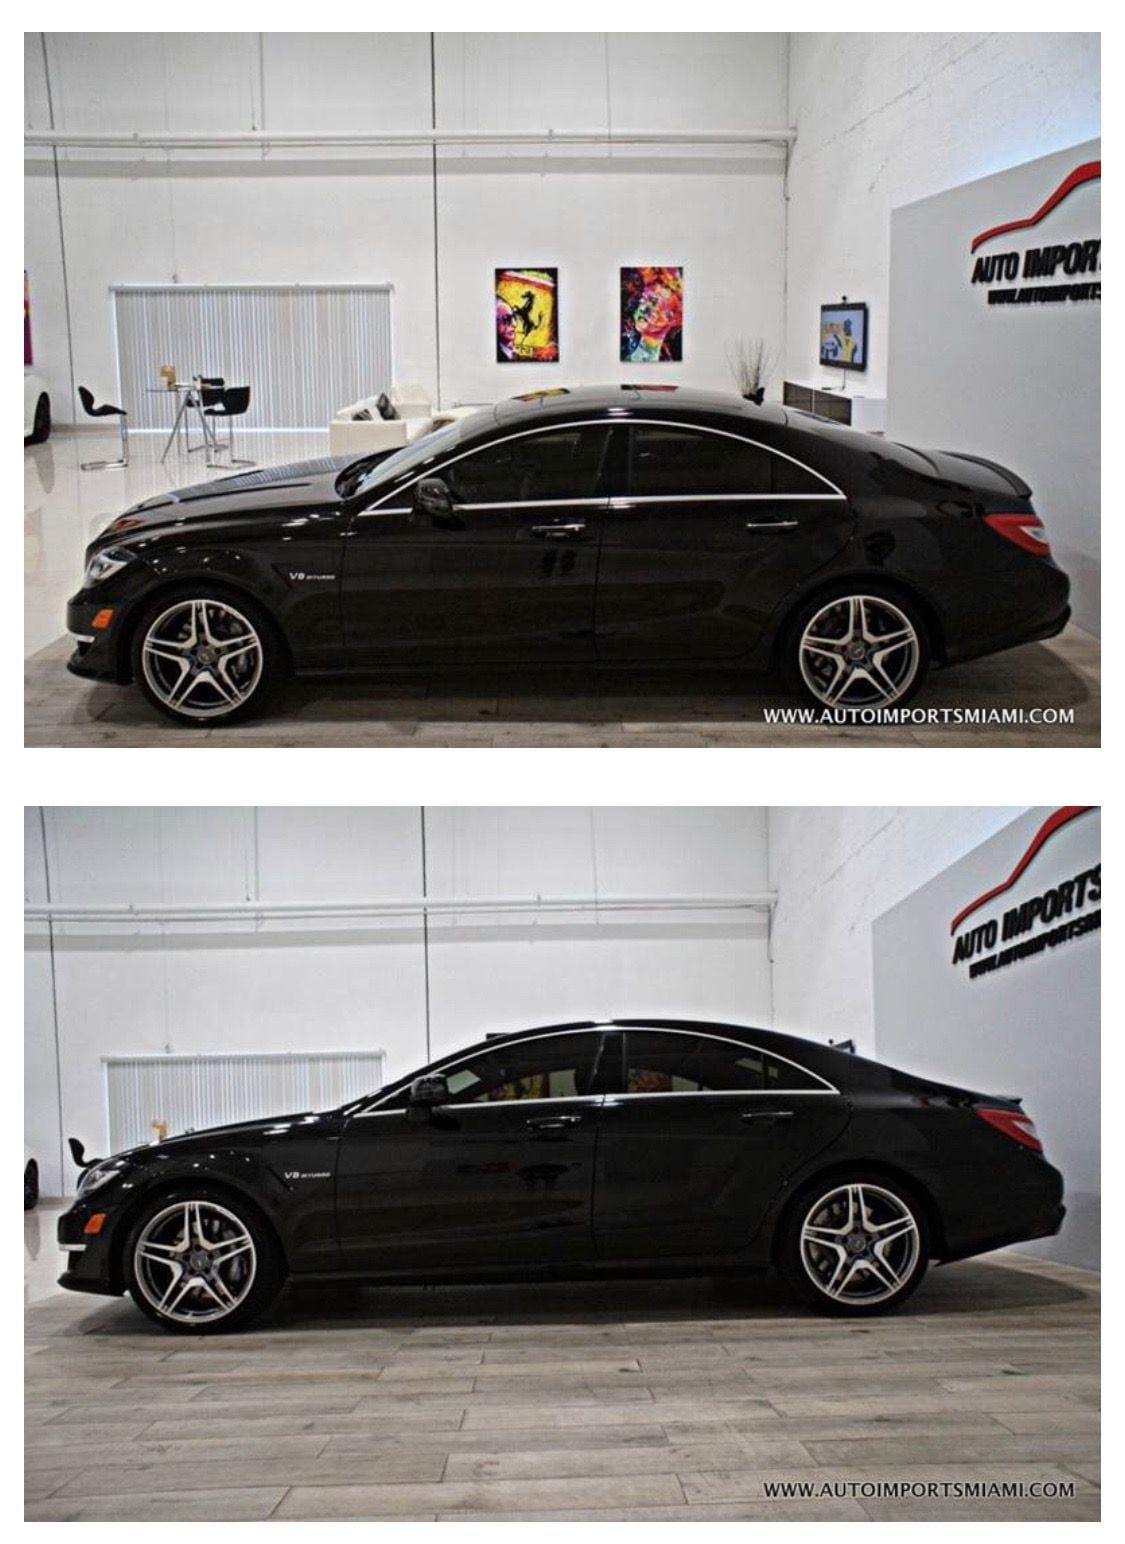 2013 Mercedes-Benz CLS63 AMG - Near perfect 2013 CLS63 AMG w/excellent Service records from Mercedes - Used - VIN WDDLJ7EB2DA079755 - 63,000 Miles - 8 cyl - 2WD - Automatic - Coupe - Black - Nashville, TN 37214, United States